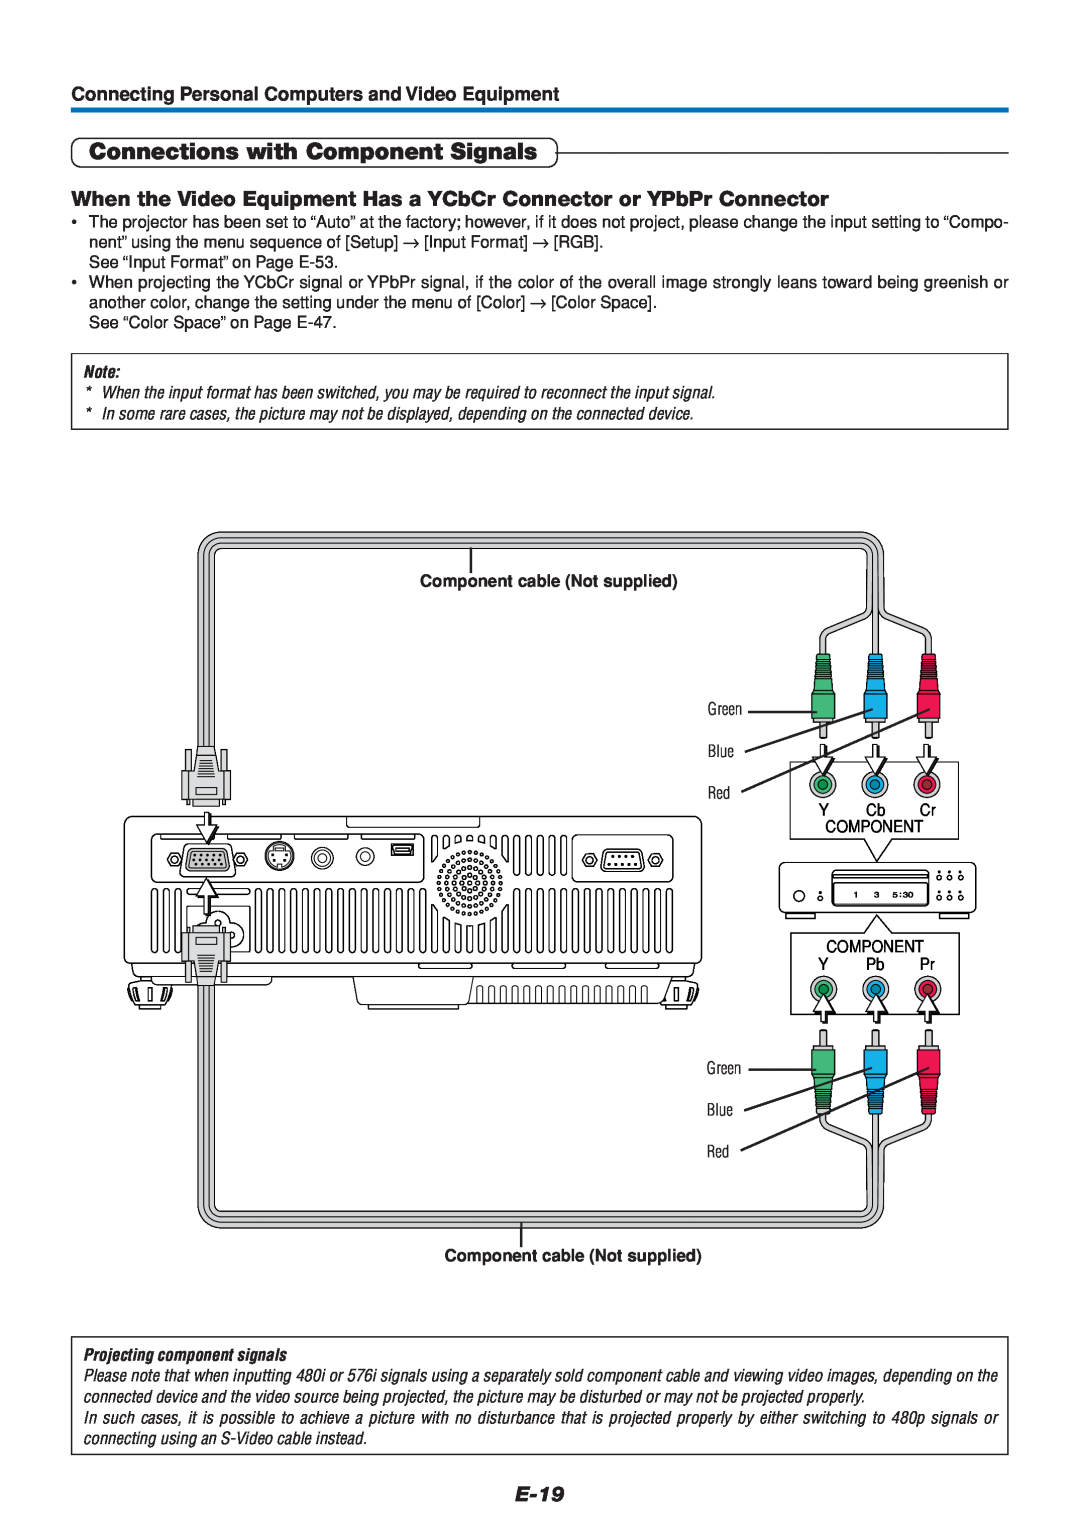 Mitsubishi Electronics DATA PROJECTOR user manual Connections with Component Signals, E-19, Component cable Not supplied 